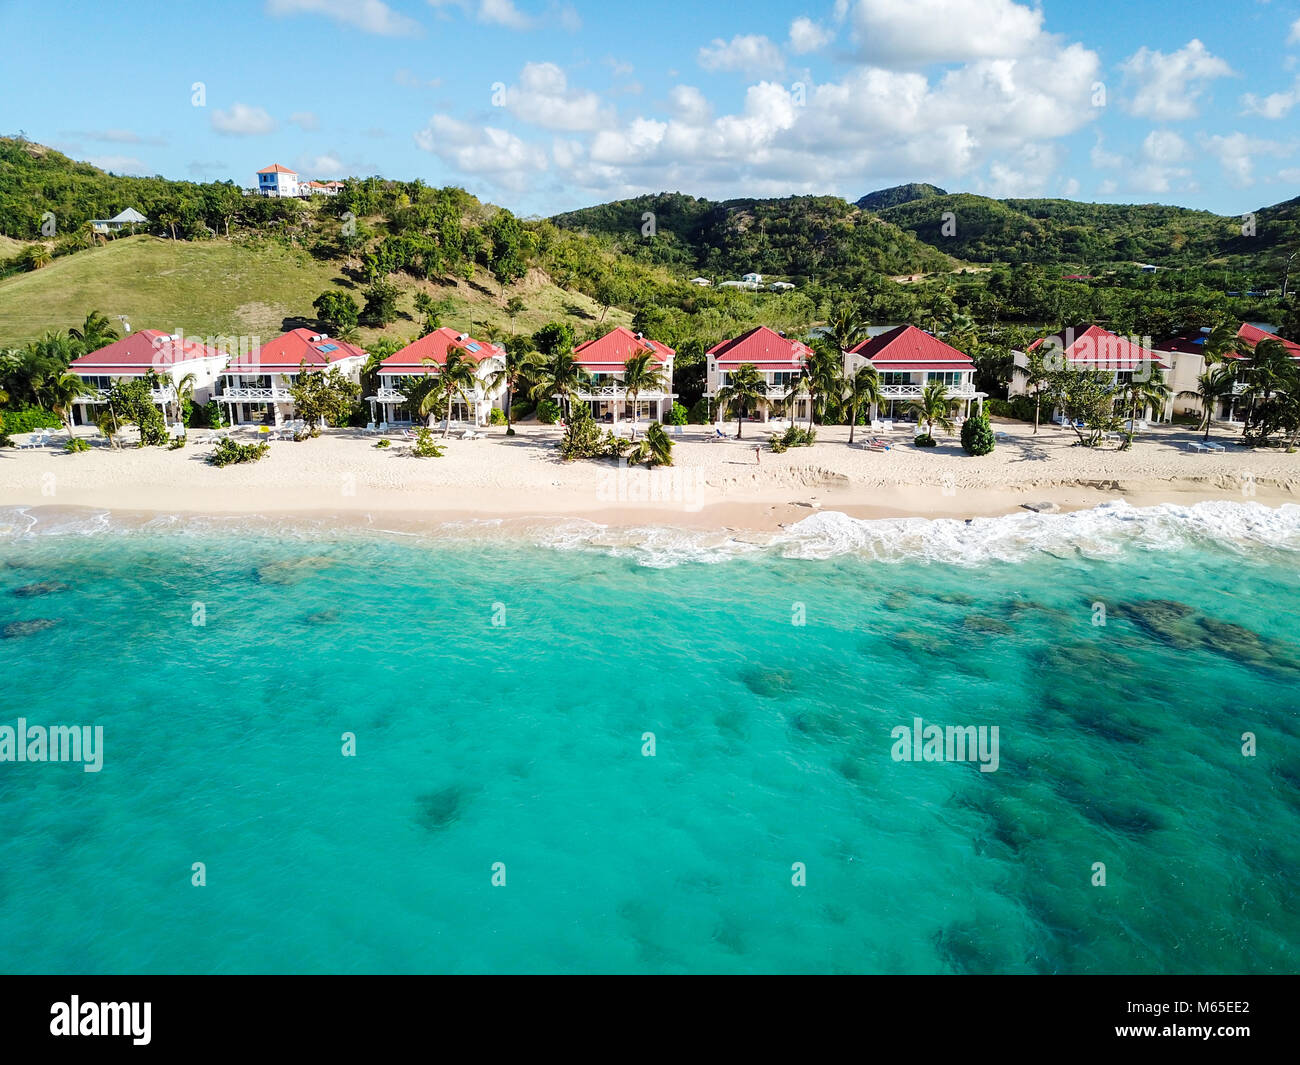 Galley Bay Beach Resort and Spa, Antigua Banque D'Images